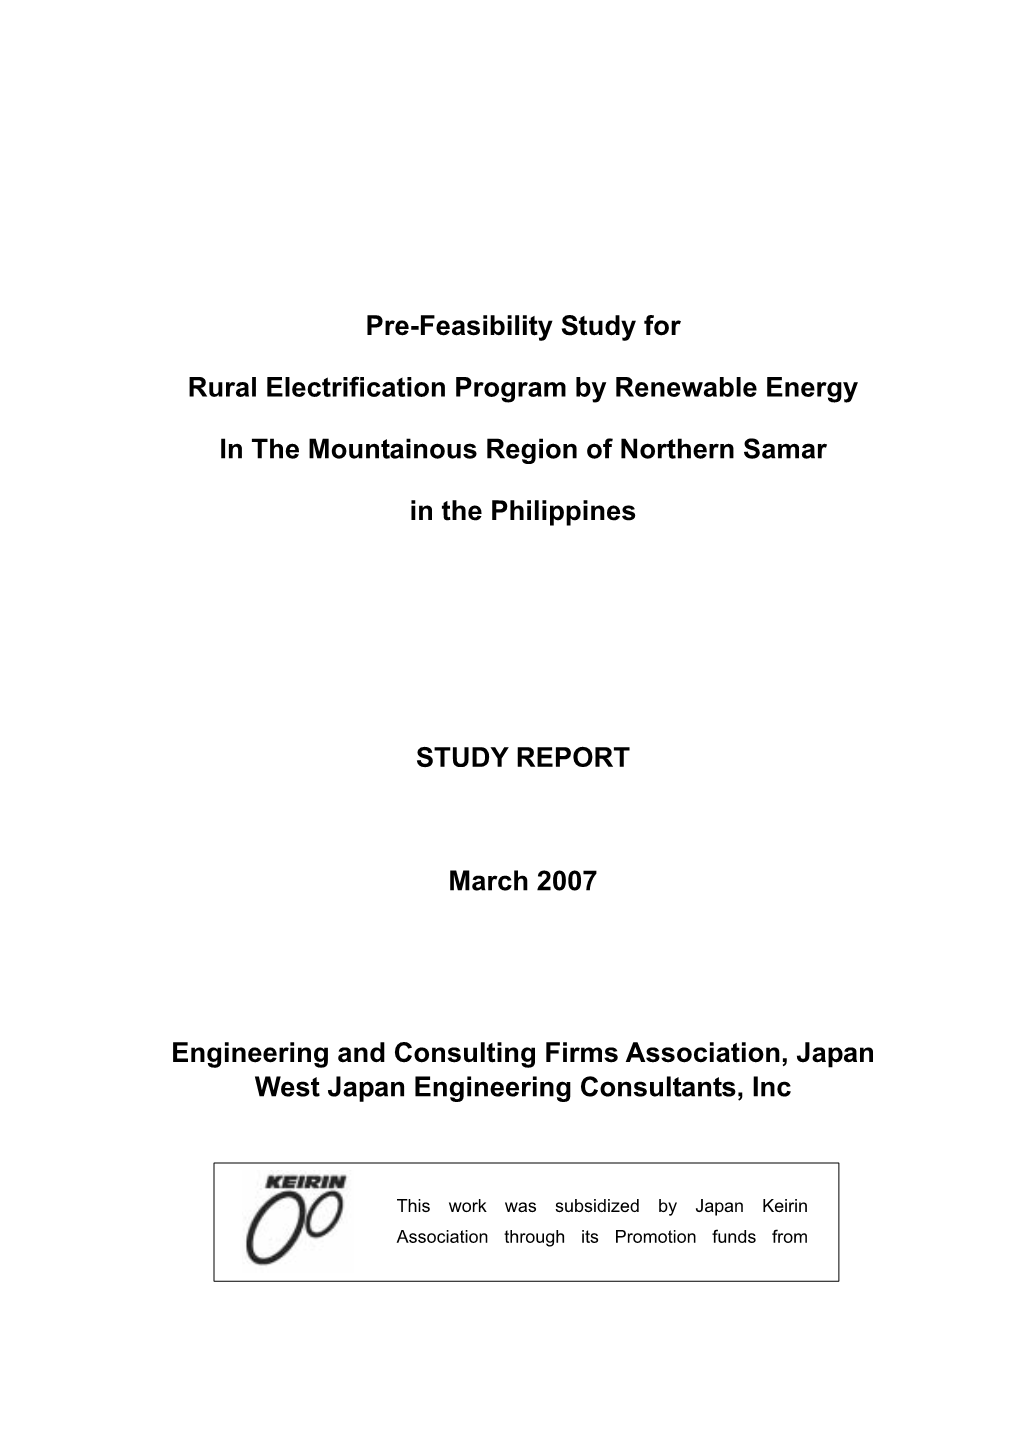 Pre-Feasibility Study for Rural Electrification Program By